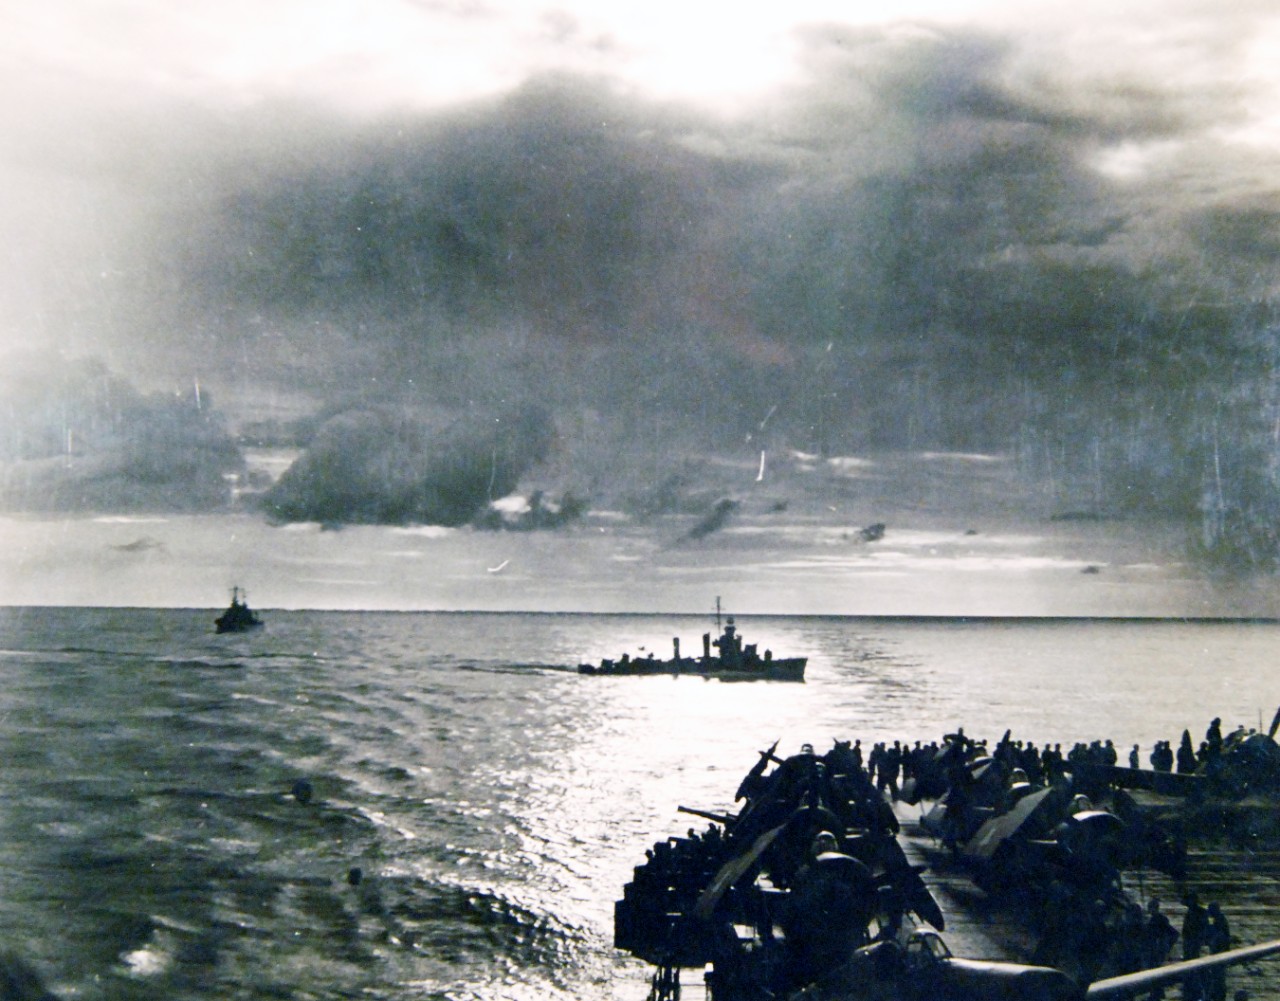 <p>80-G-30232: Operation Torch, November 1942. U.S. destroyer cuts through the wake of a U.S. aircraft carrier on patrol, first day of fighting off North Africa, November 8.&nbsp;</p>
